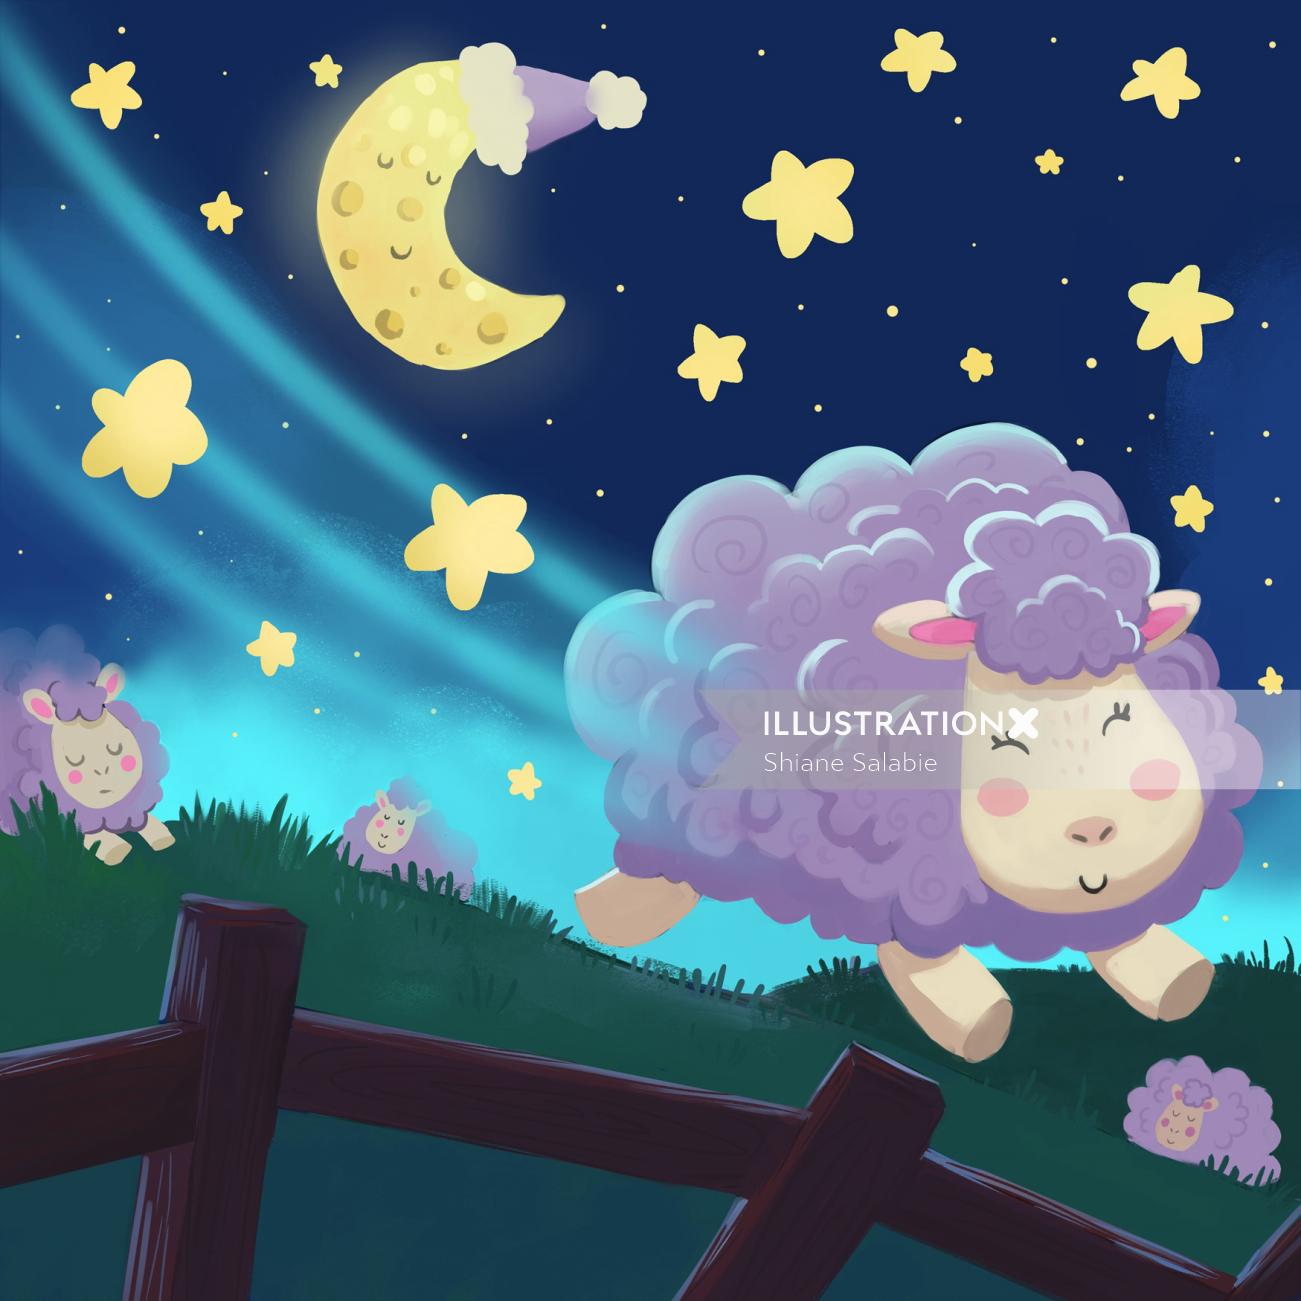 Character design of a Lullaby Sheep jumps over the fence